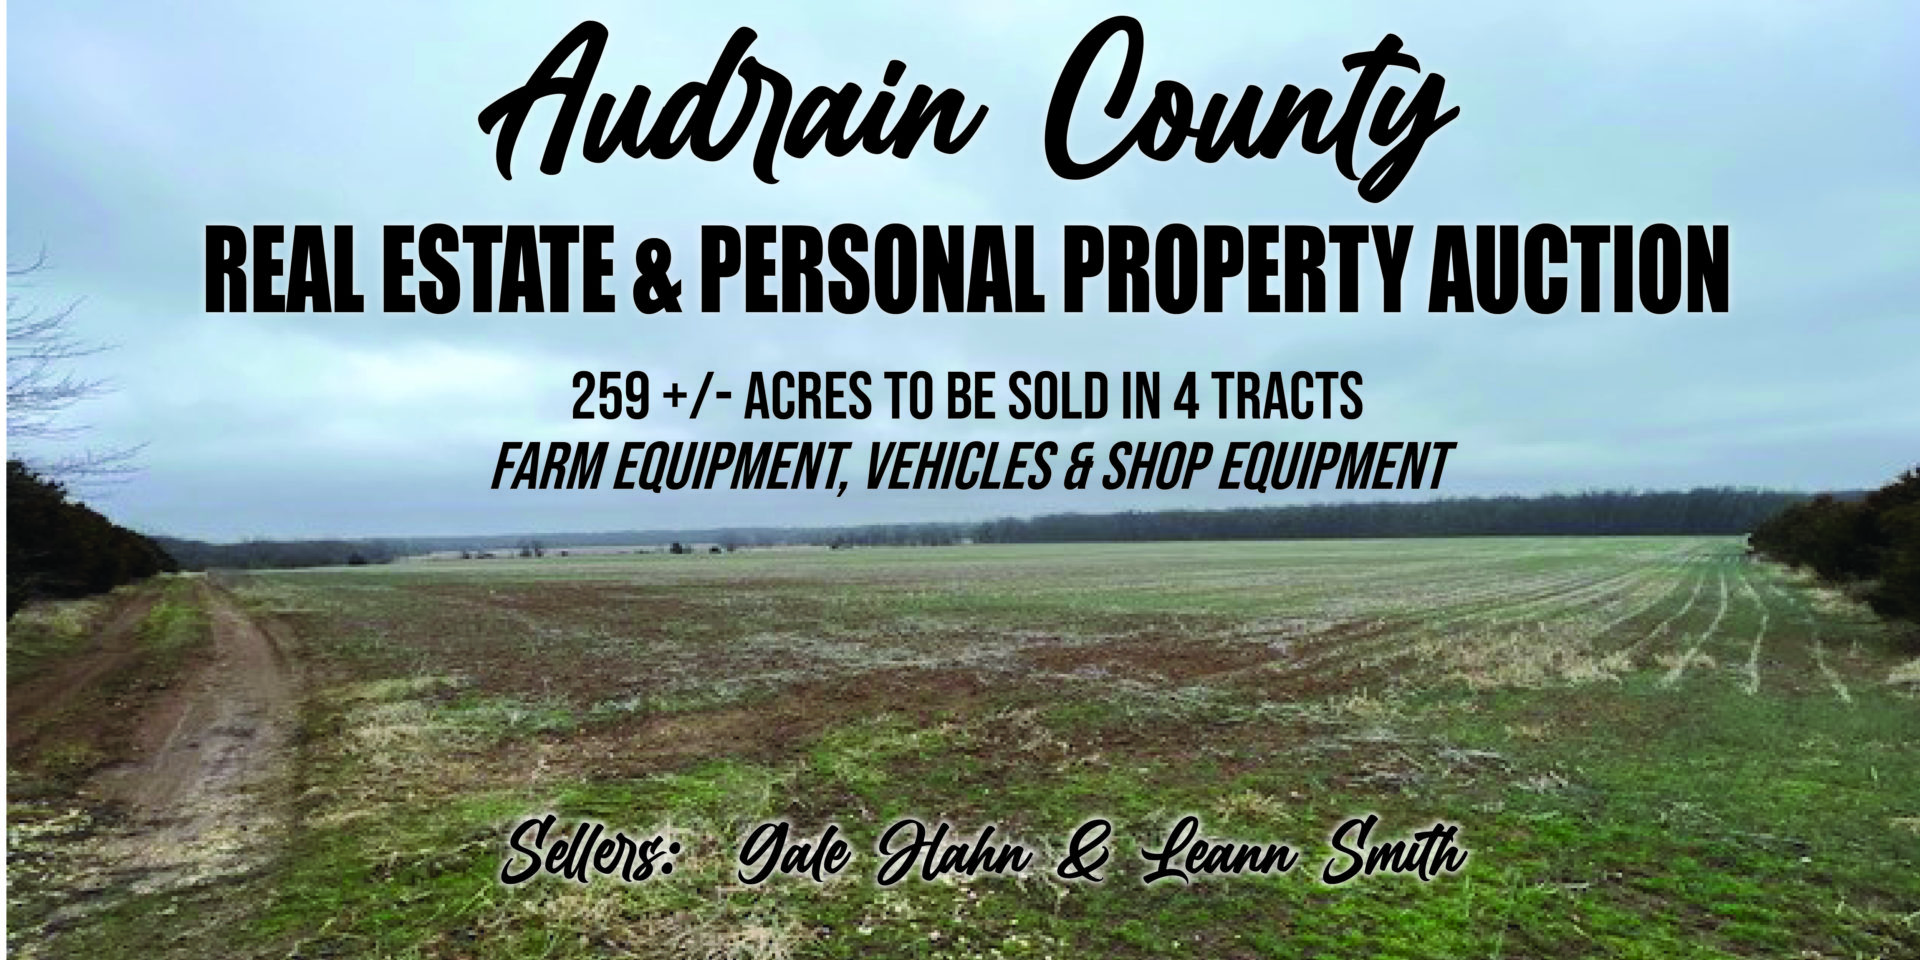 Audrain County Real Estate & Personal Property Auction